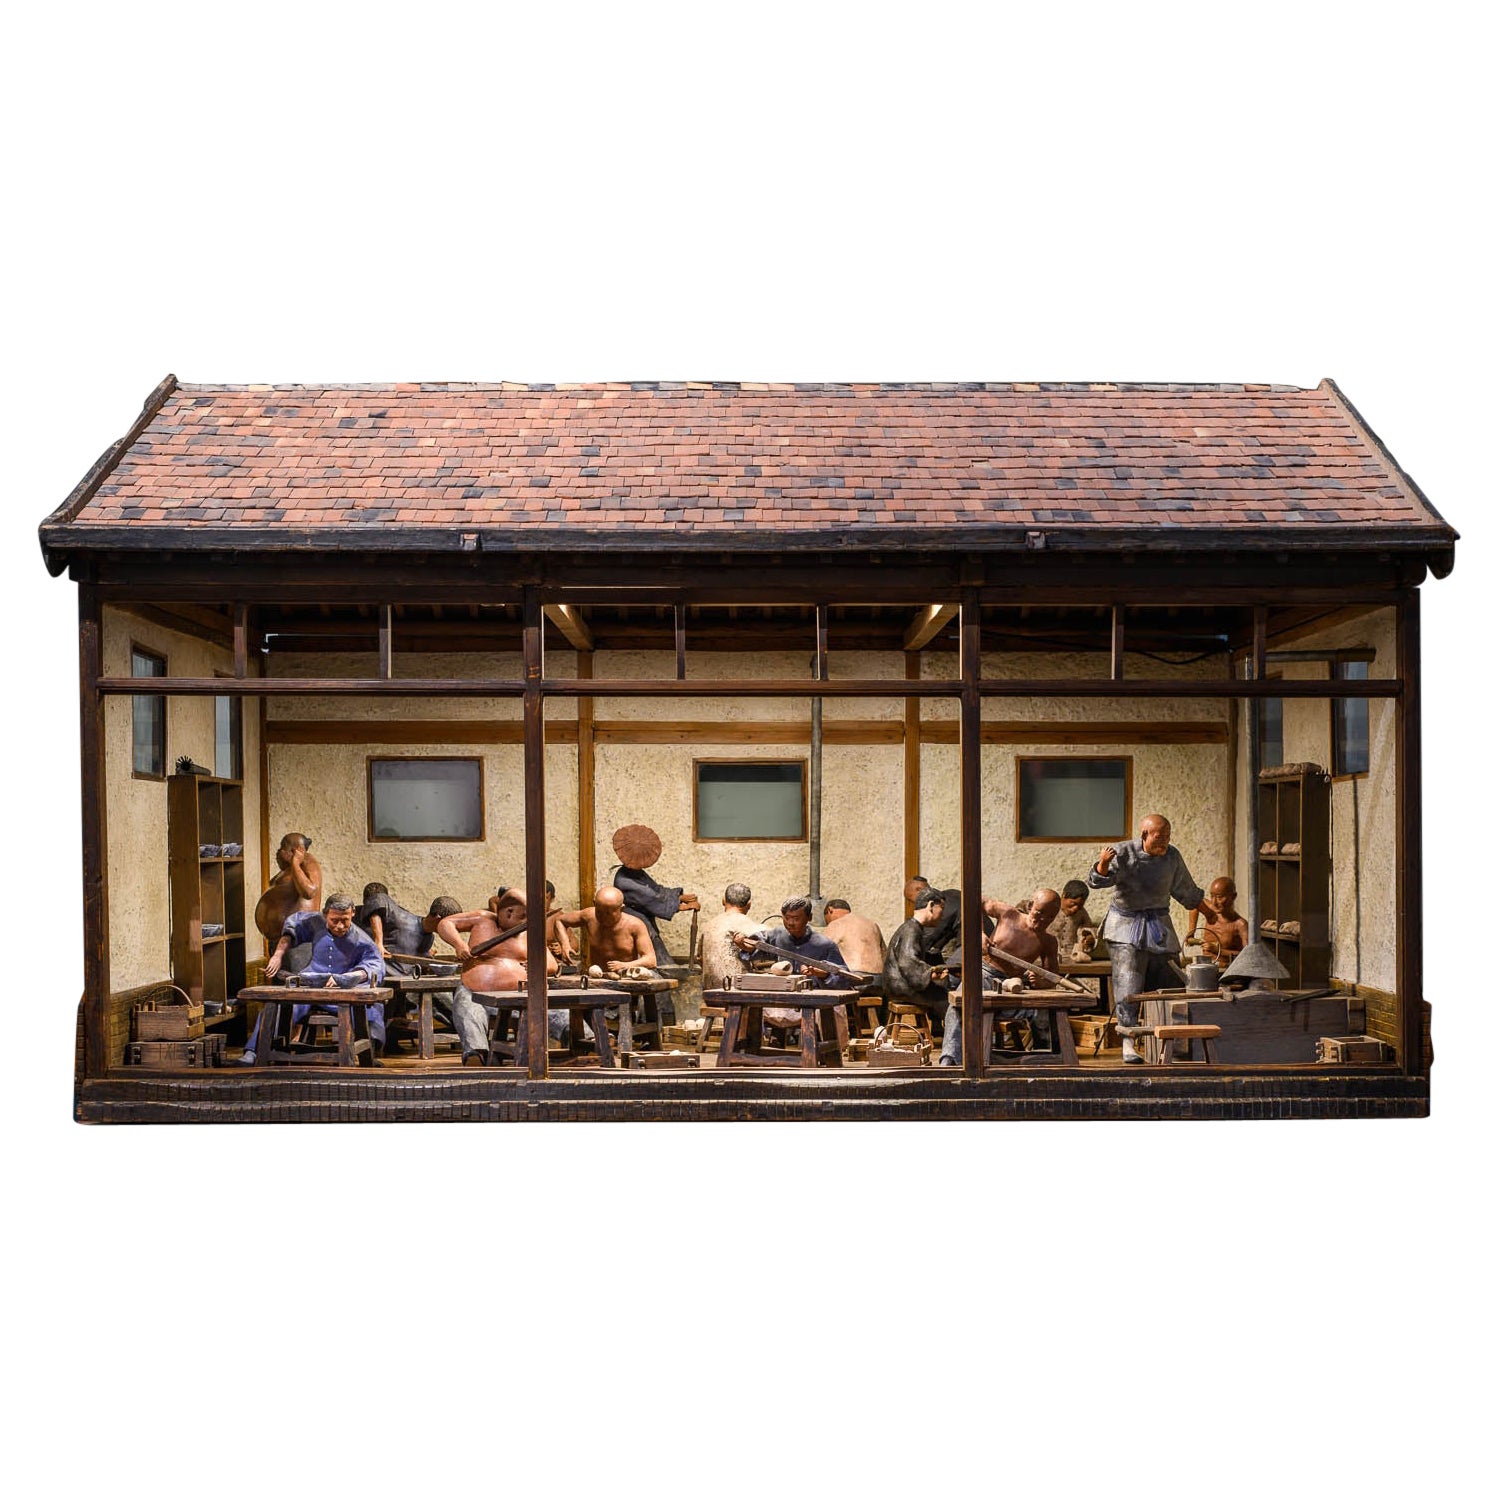 Chinese 19 th C Workshop-Scaled model with 17 polychromed figures.World exhibit For Sale